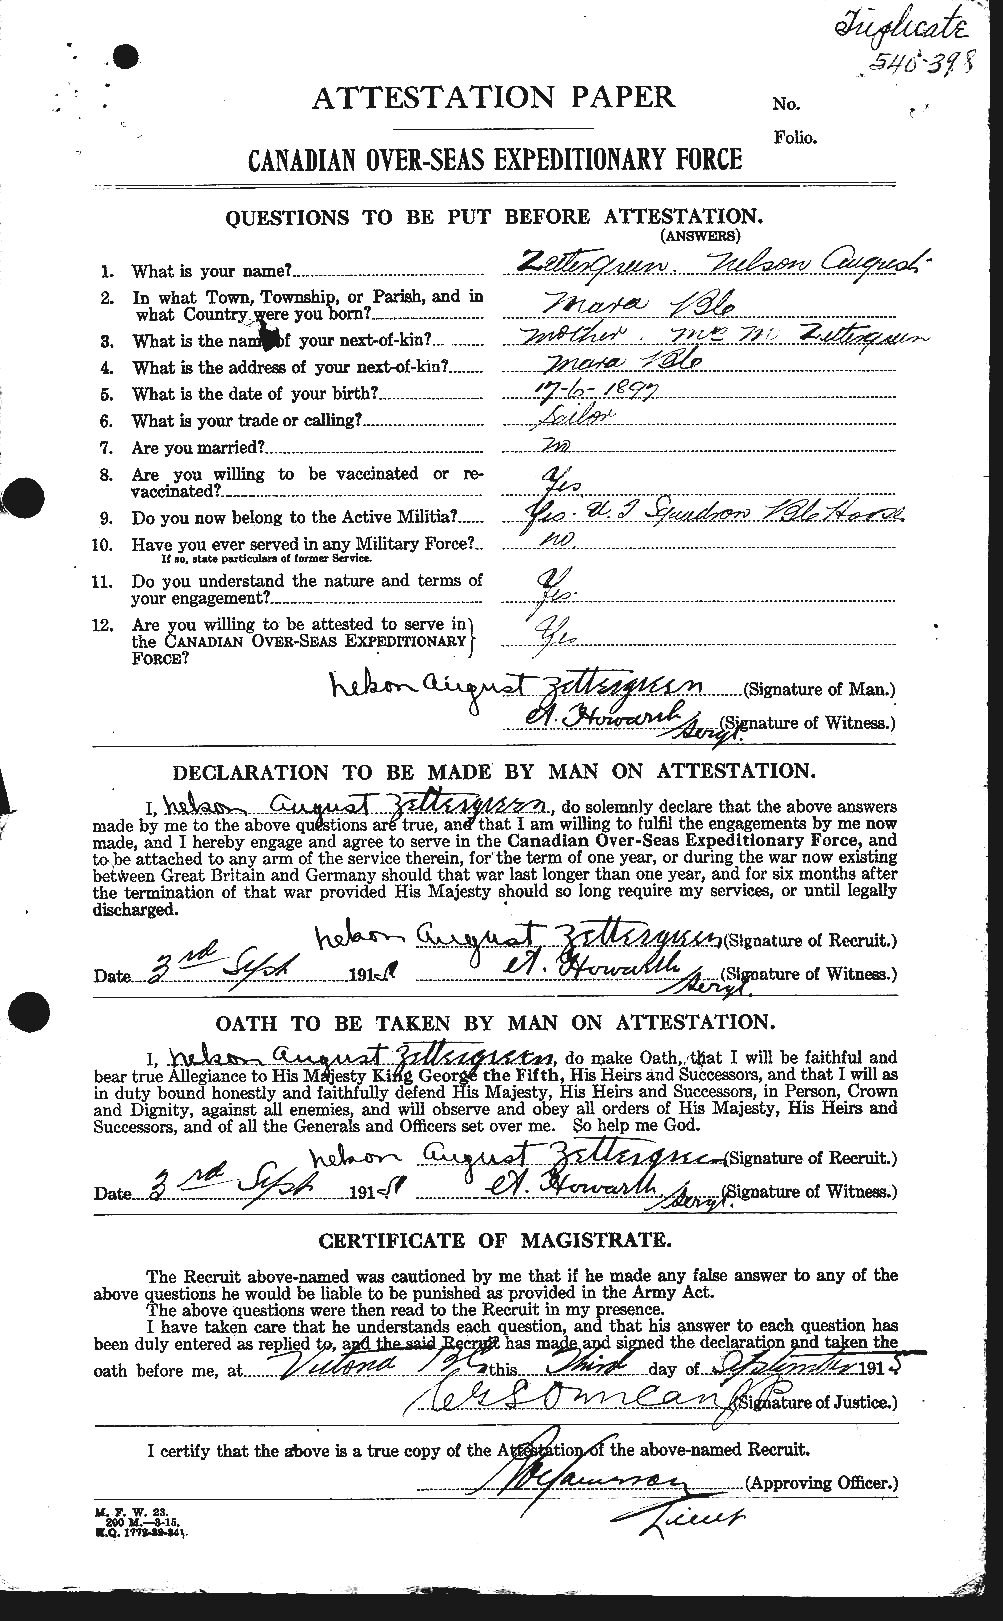 Personnel Records of the First World War - CEF 660136a